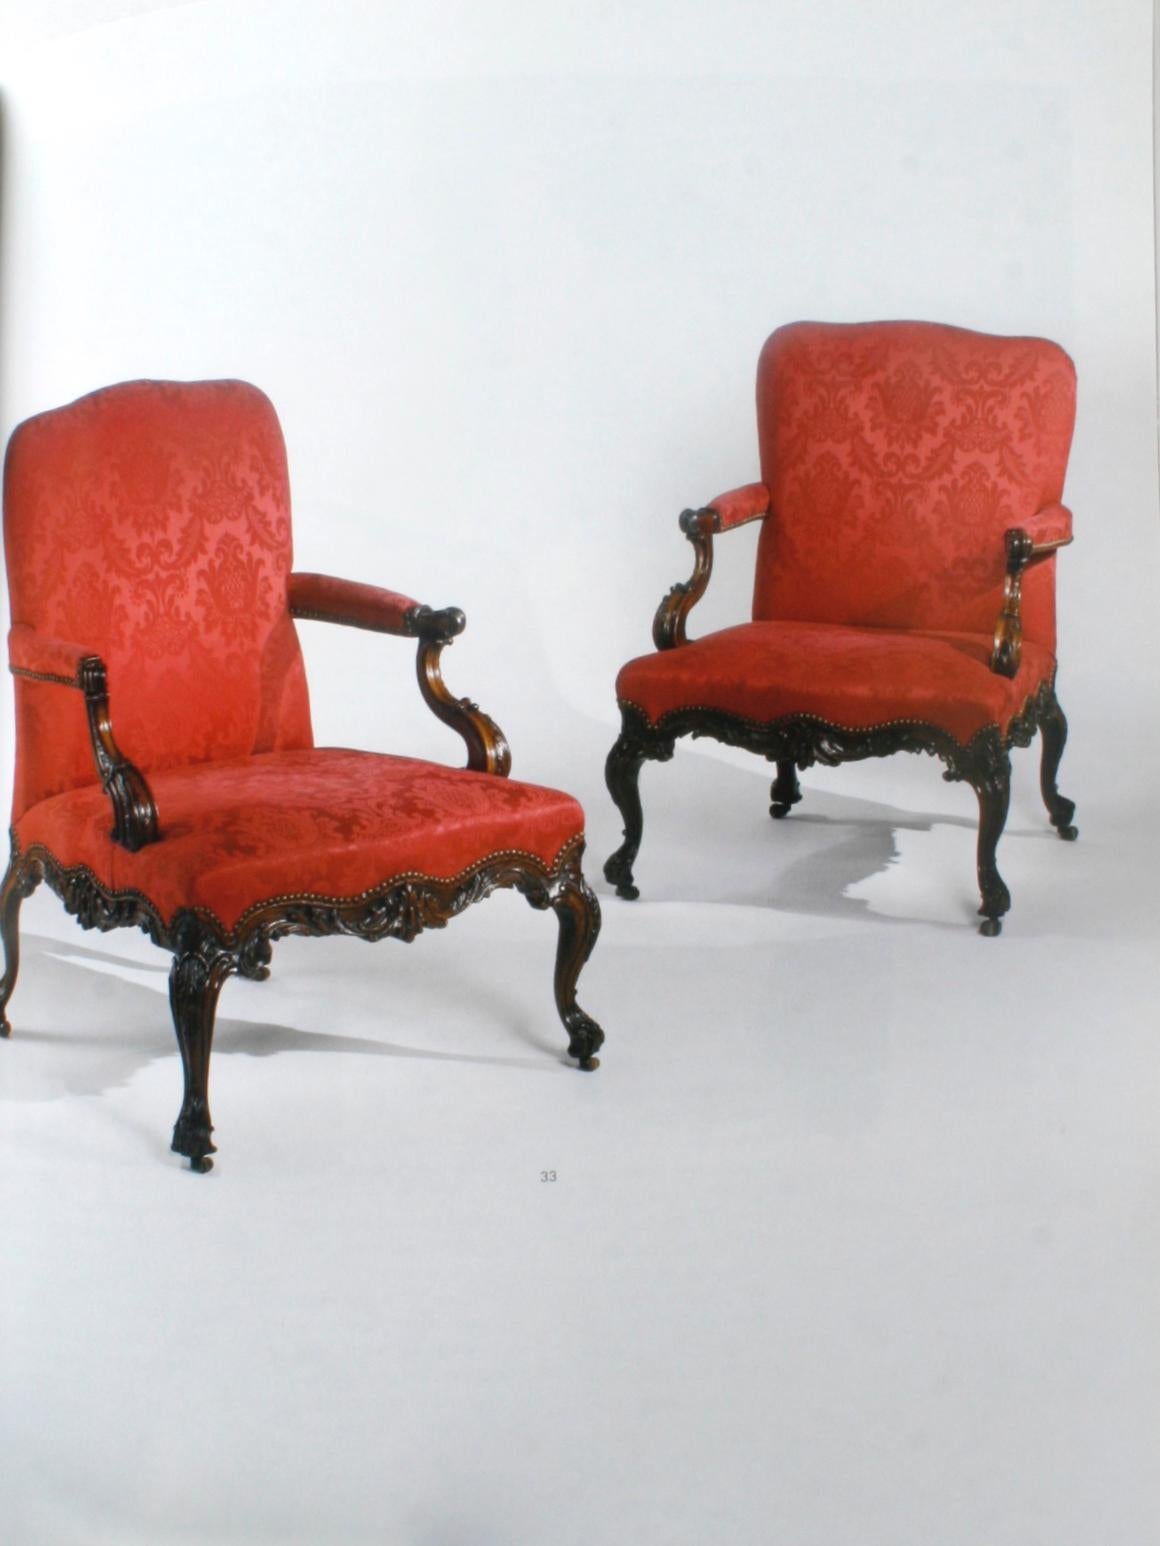 Sotheby's: New York Important English Furniture, Silver & Carpets from HSBC 4